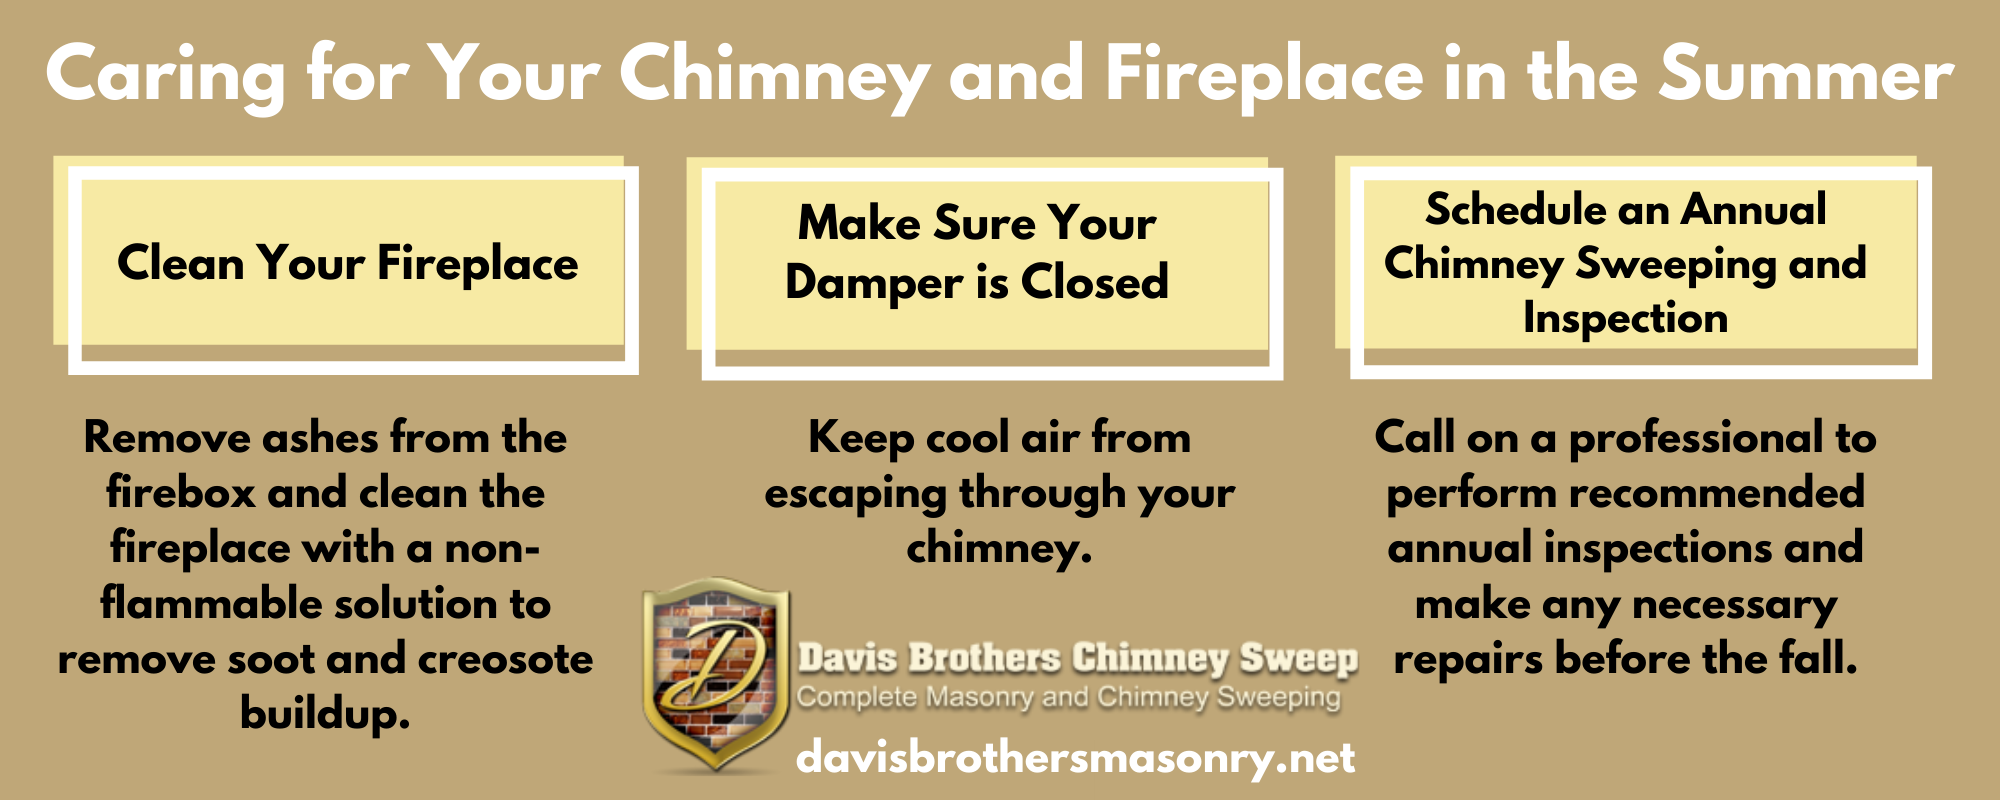 infographic depicting how to care for your chimney in summer